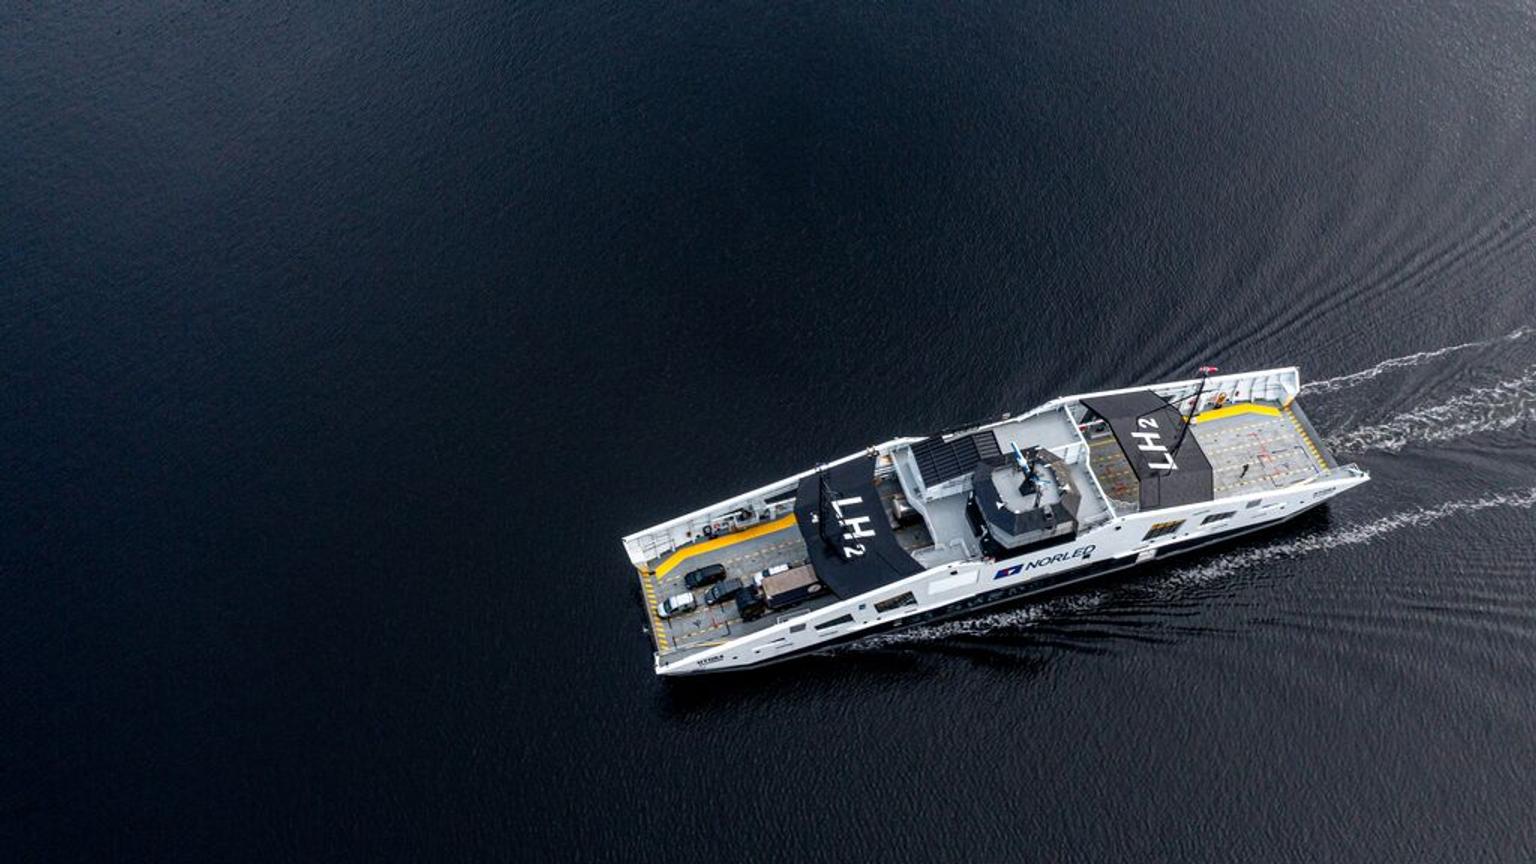 View of a liquid hydrogen ferry from above